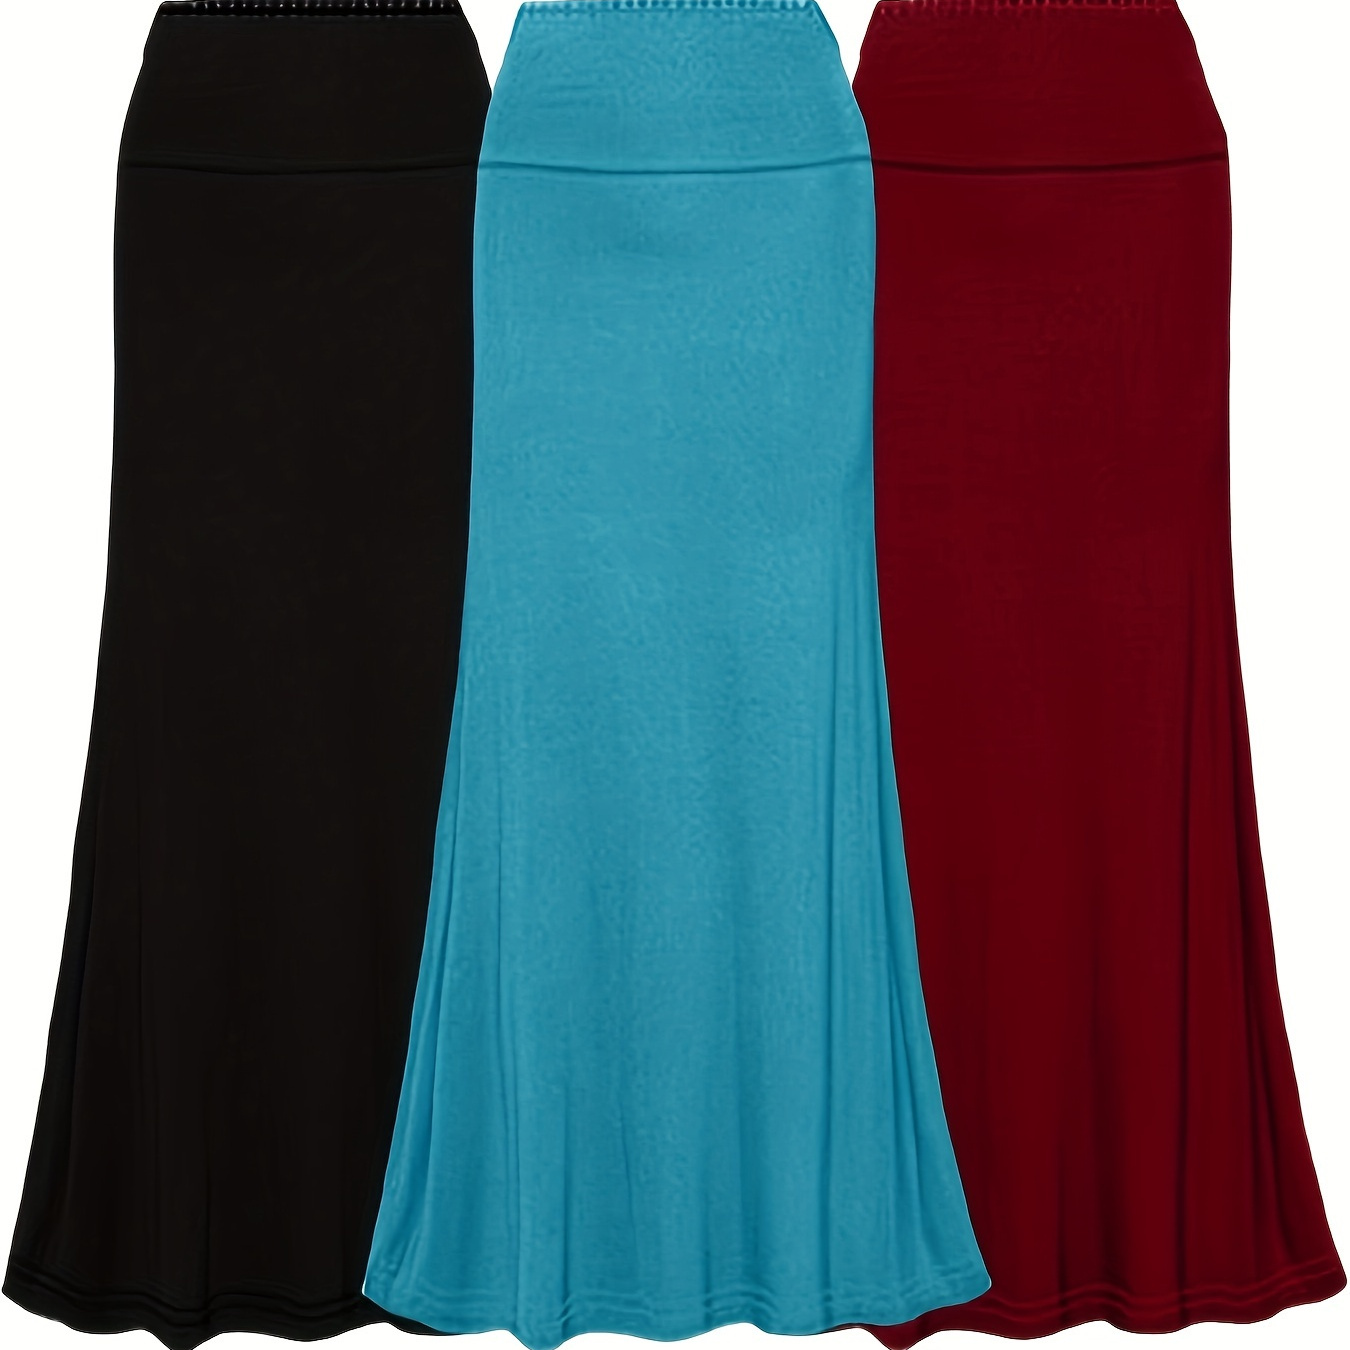 

3 Packs Plus Size Mermaid Hem Skirts, Casual Solid Skirt For Spring & Summer, Women's Plus Size clothing